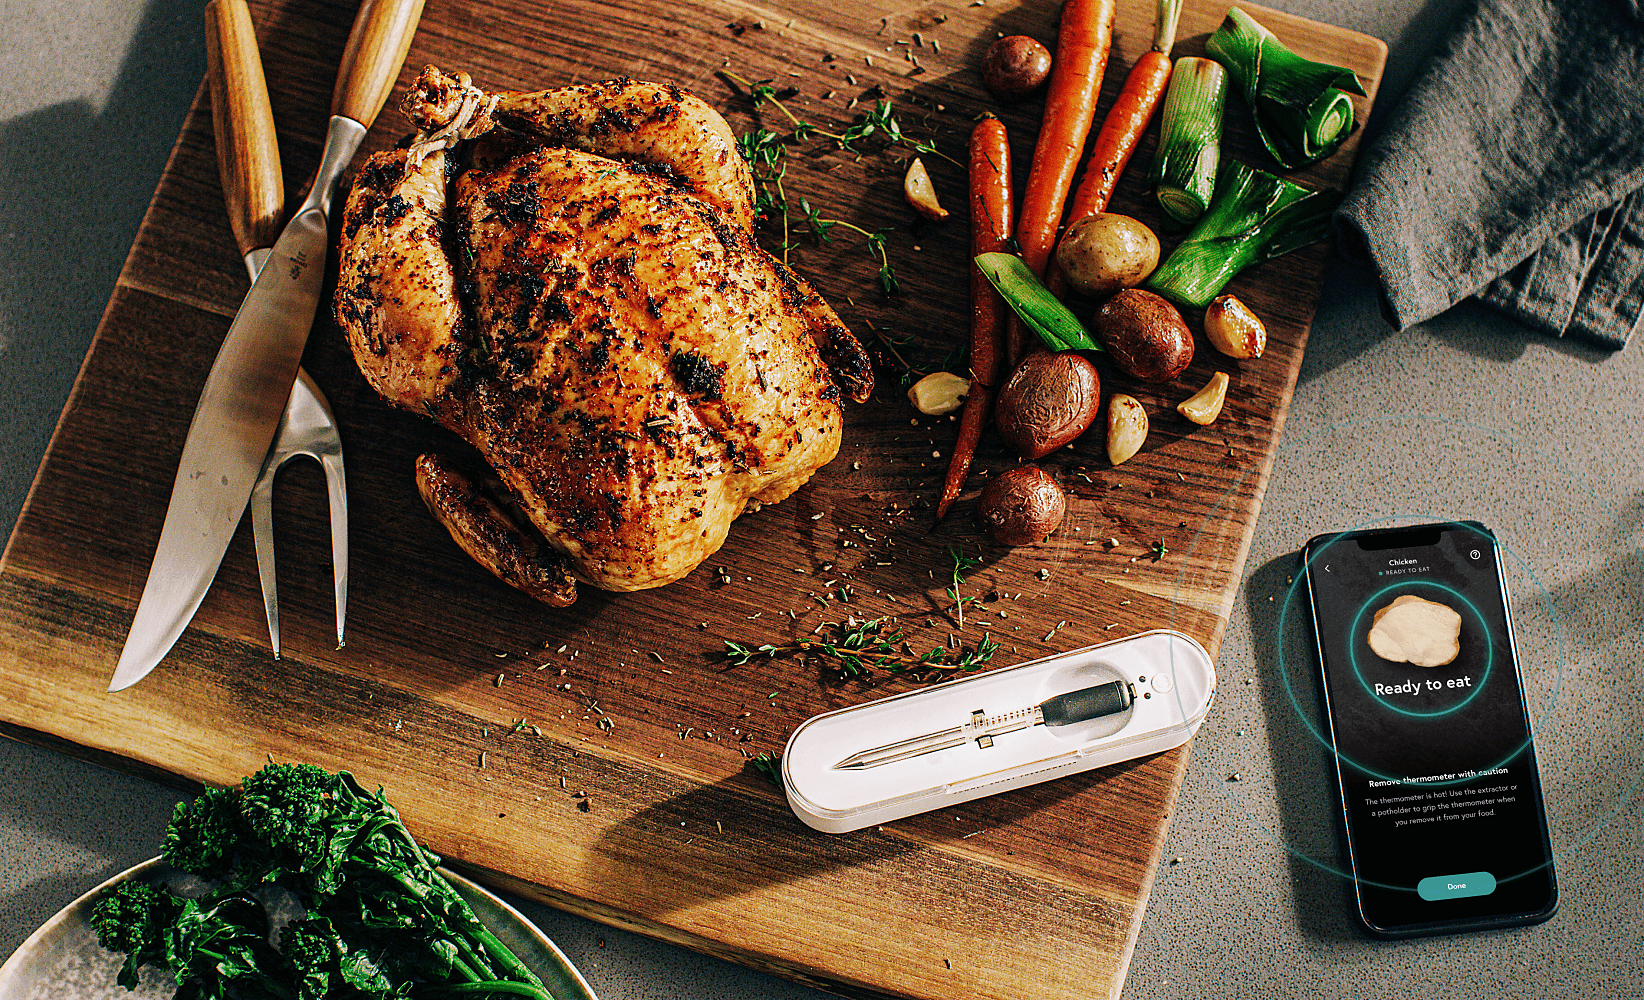 A roasted chicken and vegetables with the Yummly App and Thermometer.